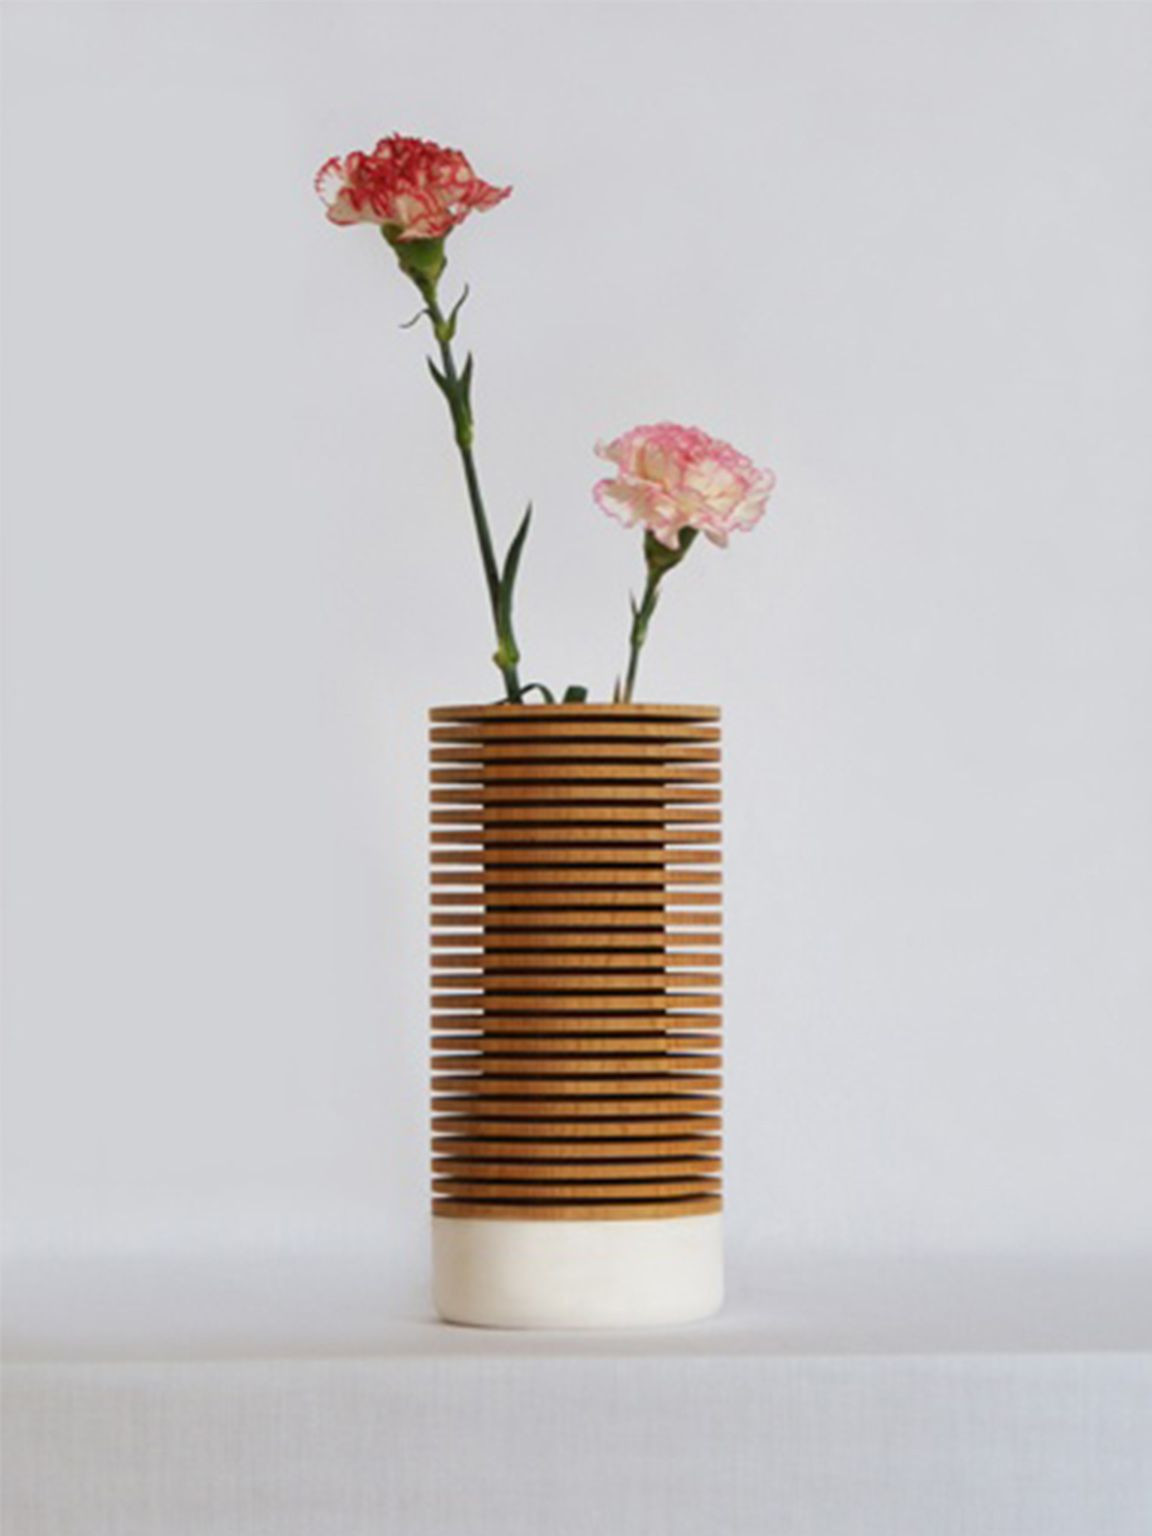 tin can vase ideas of mingshuo zhang industrial design flowers a plants a flower pot intended for mingshuo zhang industrial design